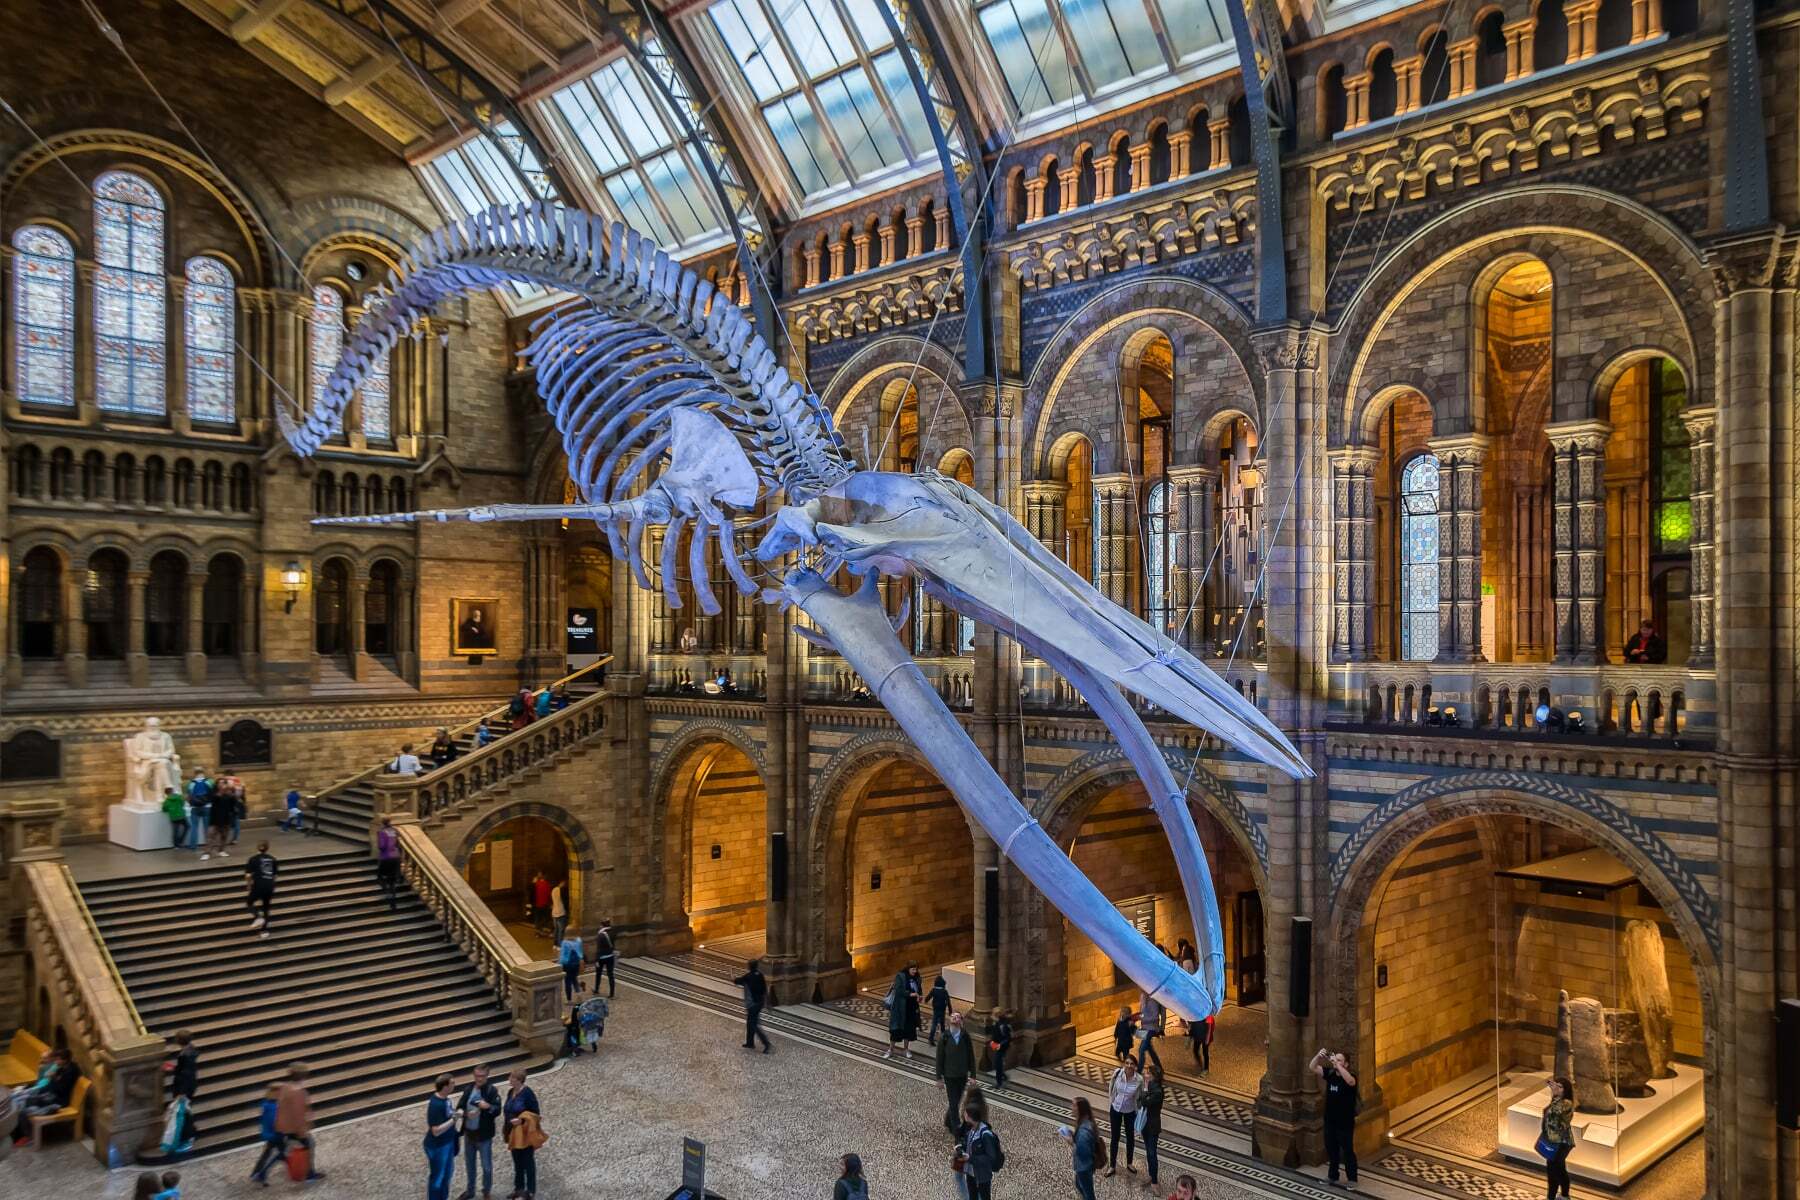 <p>You can’t go to London without stopping by the <a href="https://www.nhm.ac.uk/" class="atom_link atom_valid" rel="noreferrer noopener">Natural History Museum</a>. In addition to being one of the world’s most popular museums, it’s also a leading science research centre. It’s a great place to learn all about the planet’s biodiversity and is brimming with mind-blowing exhibits such as the <a href="https://www.nhm.ac.uk/discover/news/2017/july/museum-unveils-hope-the-blue-whale-skeleton.html" class="atom_link atom_valid" rel="noreferrer noopener">enormous blue whale skeleton</a> that’s suspended in Hintze Hall.</p>